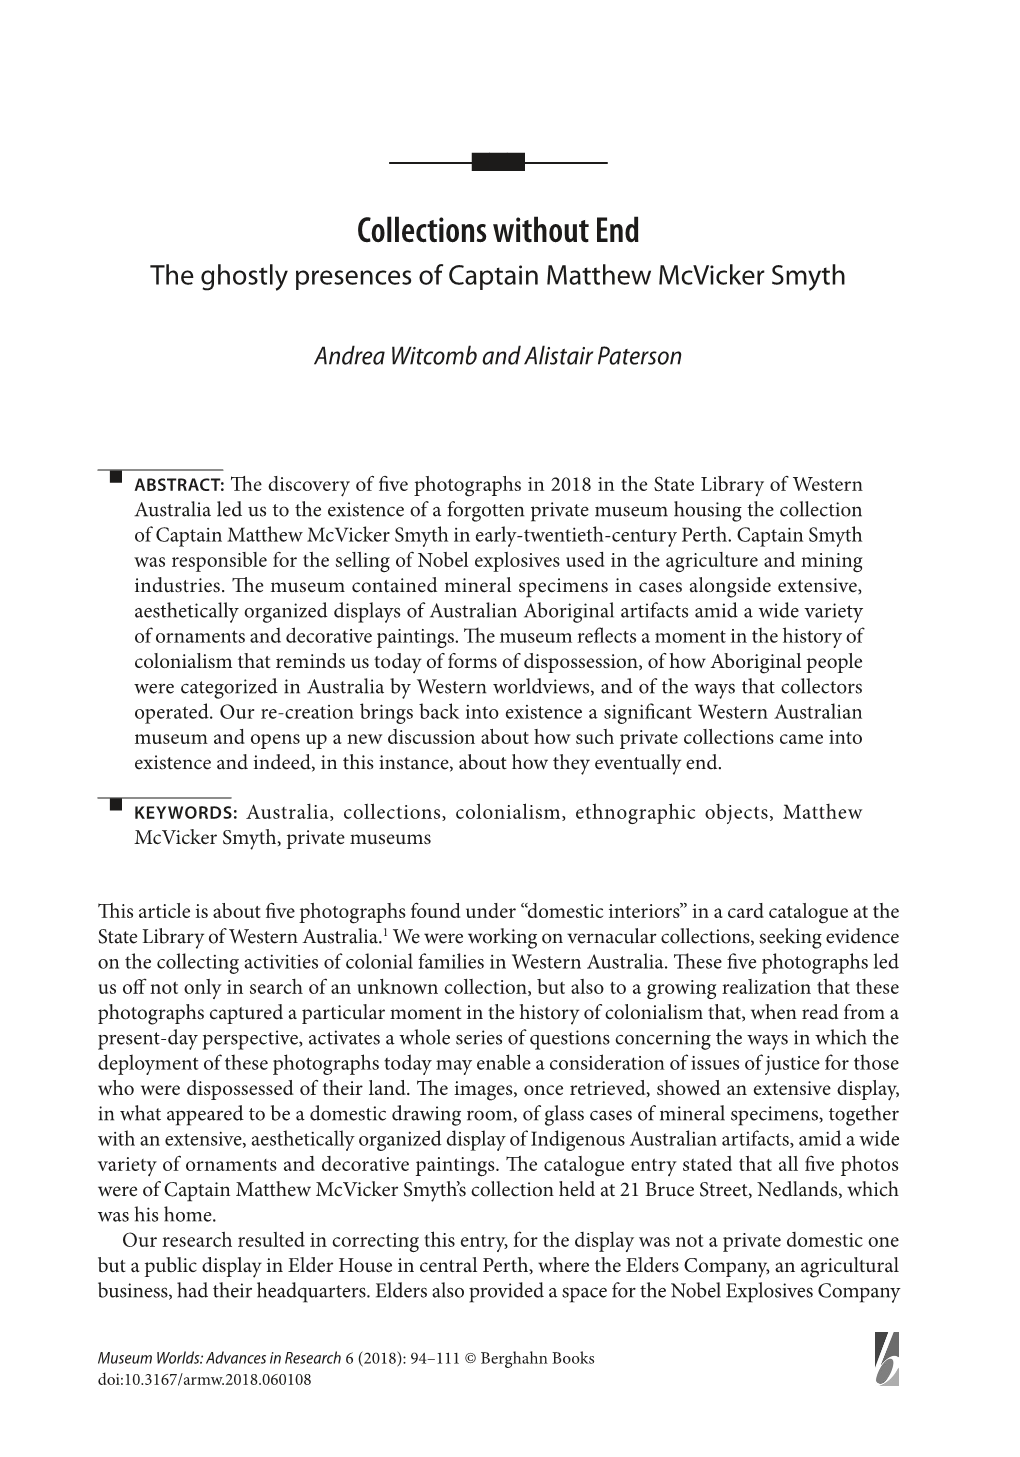 Collections Without End the Ghostly Presences of Captain Matthew Mcvicker Smyth